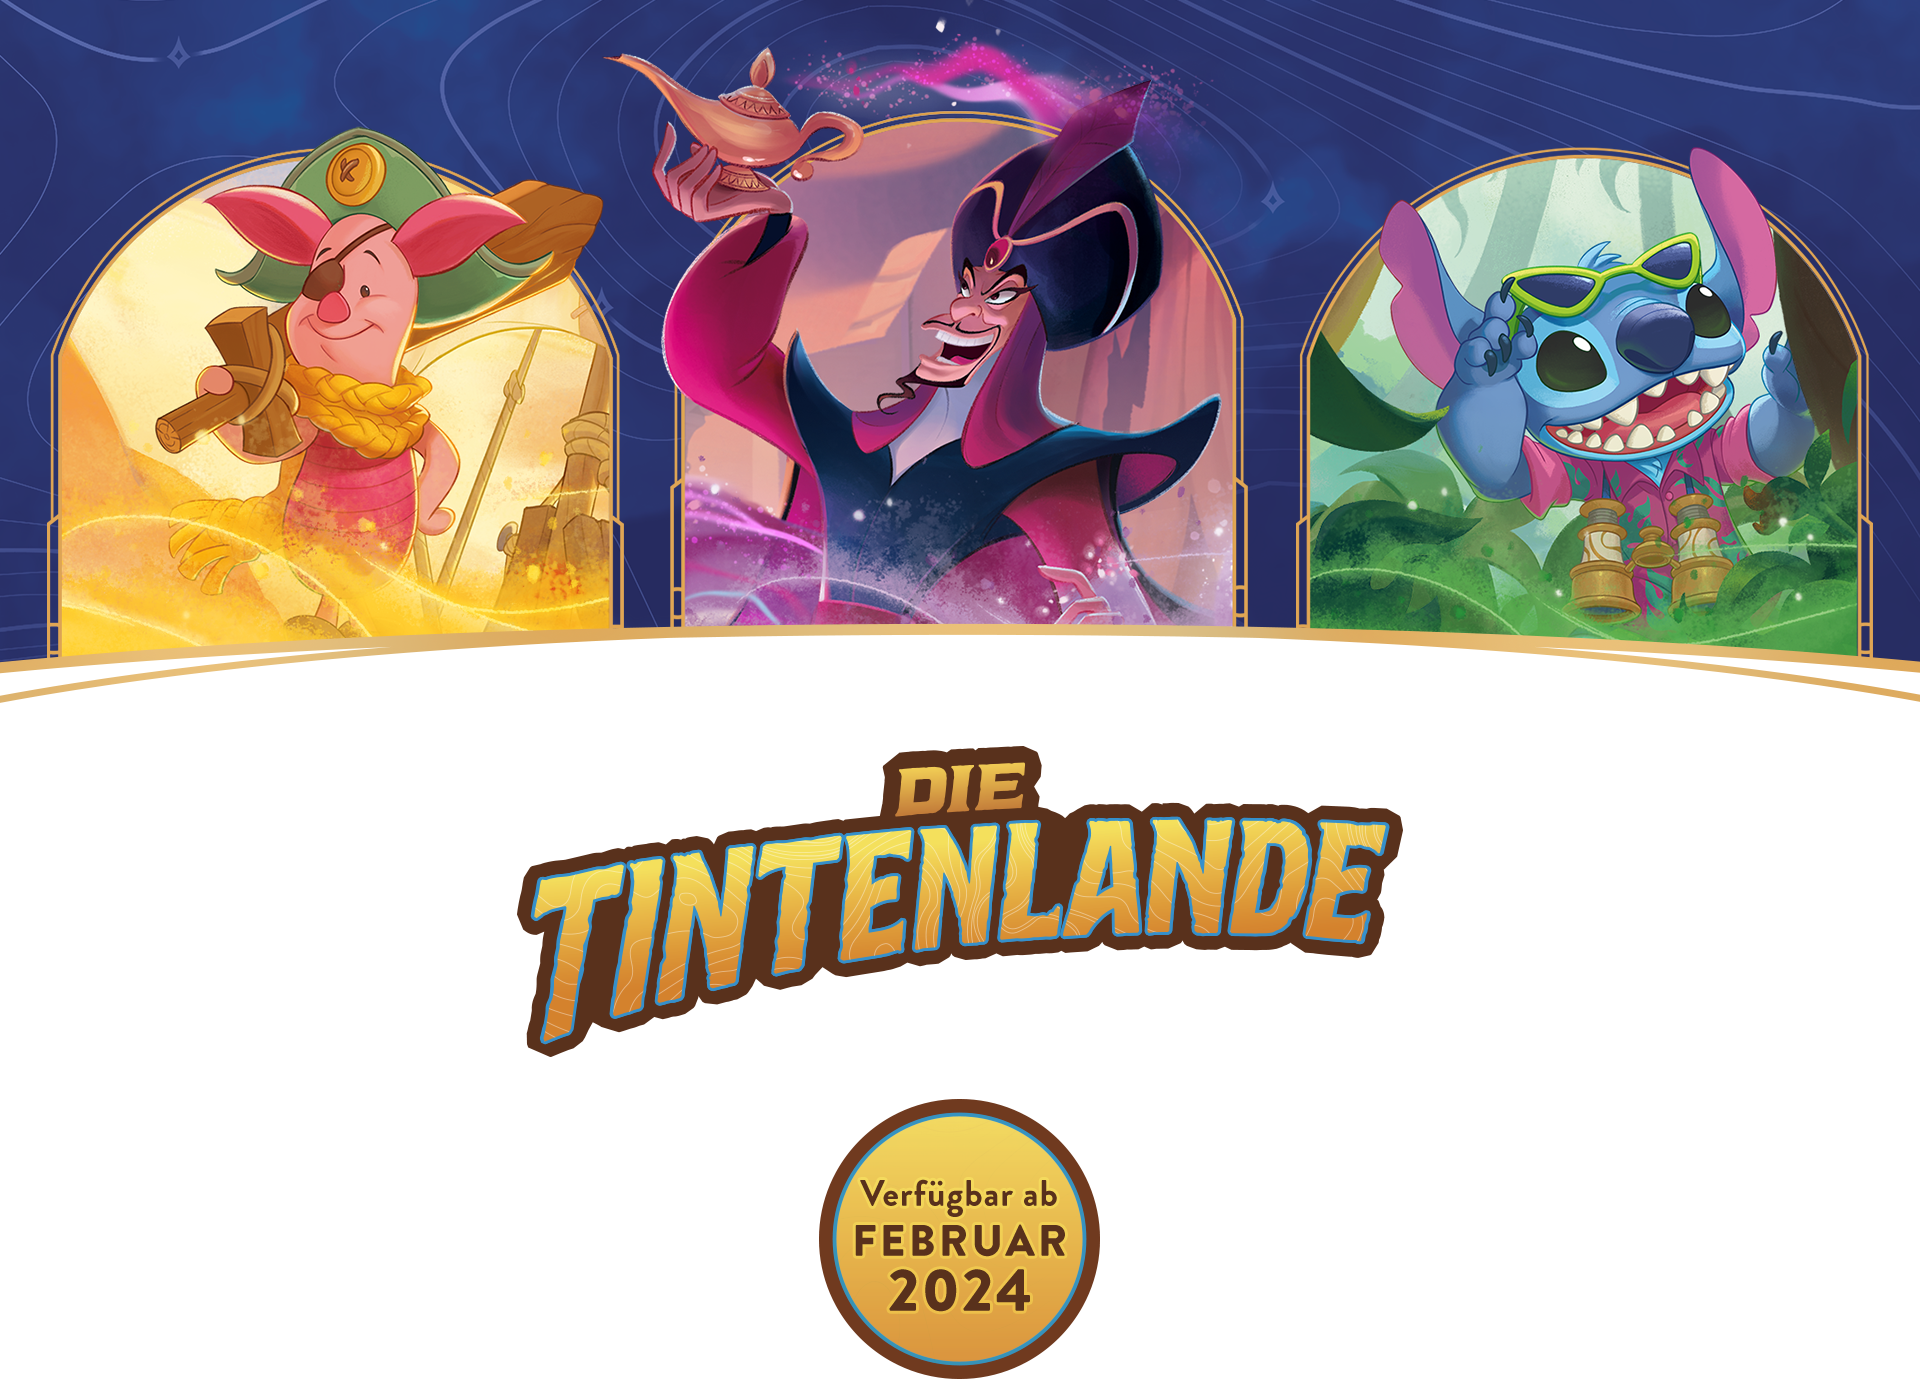 Decorative header image showing three characters (left to right: Piglet, Jafar, Stitch) and a logo that says Die Tintenlande. Available February 2024